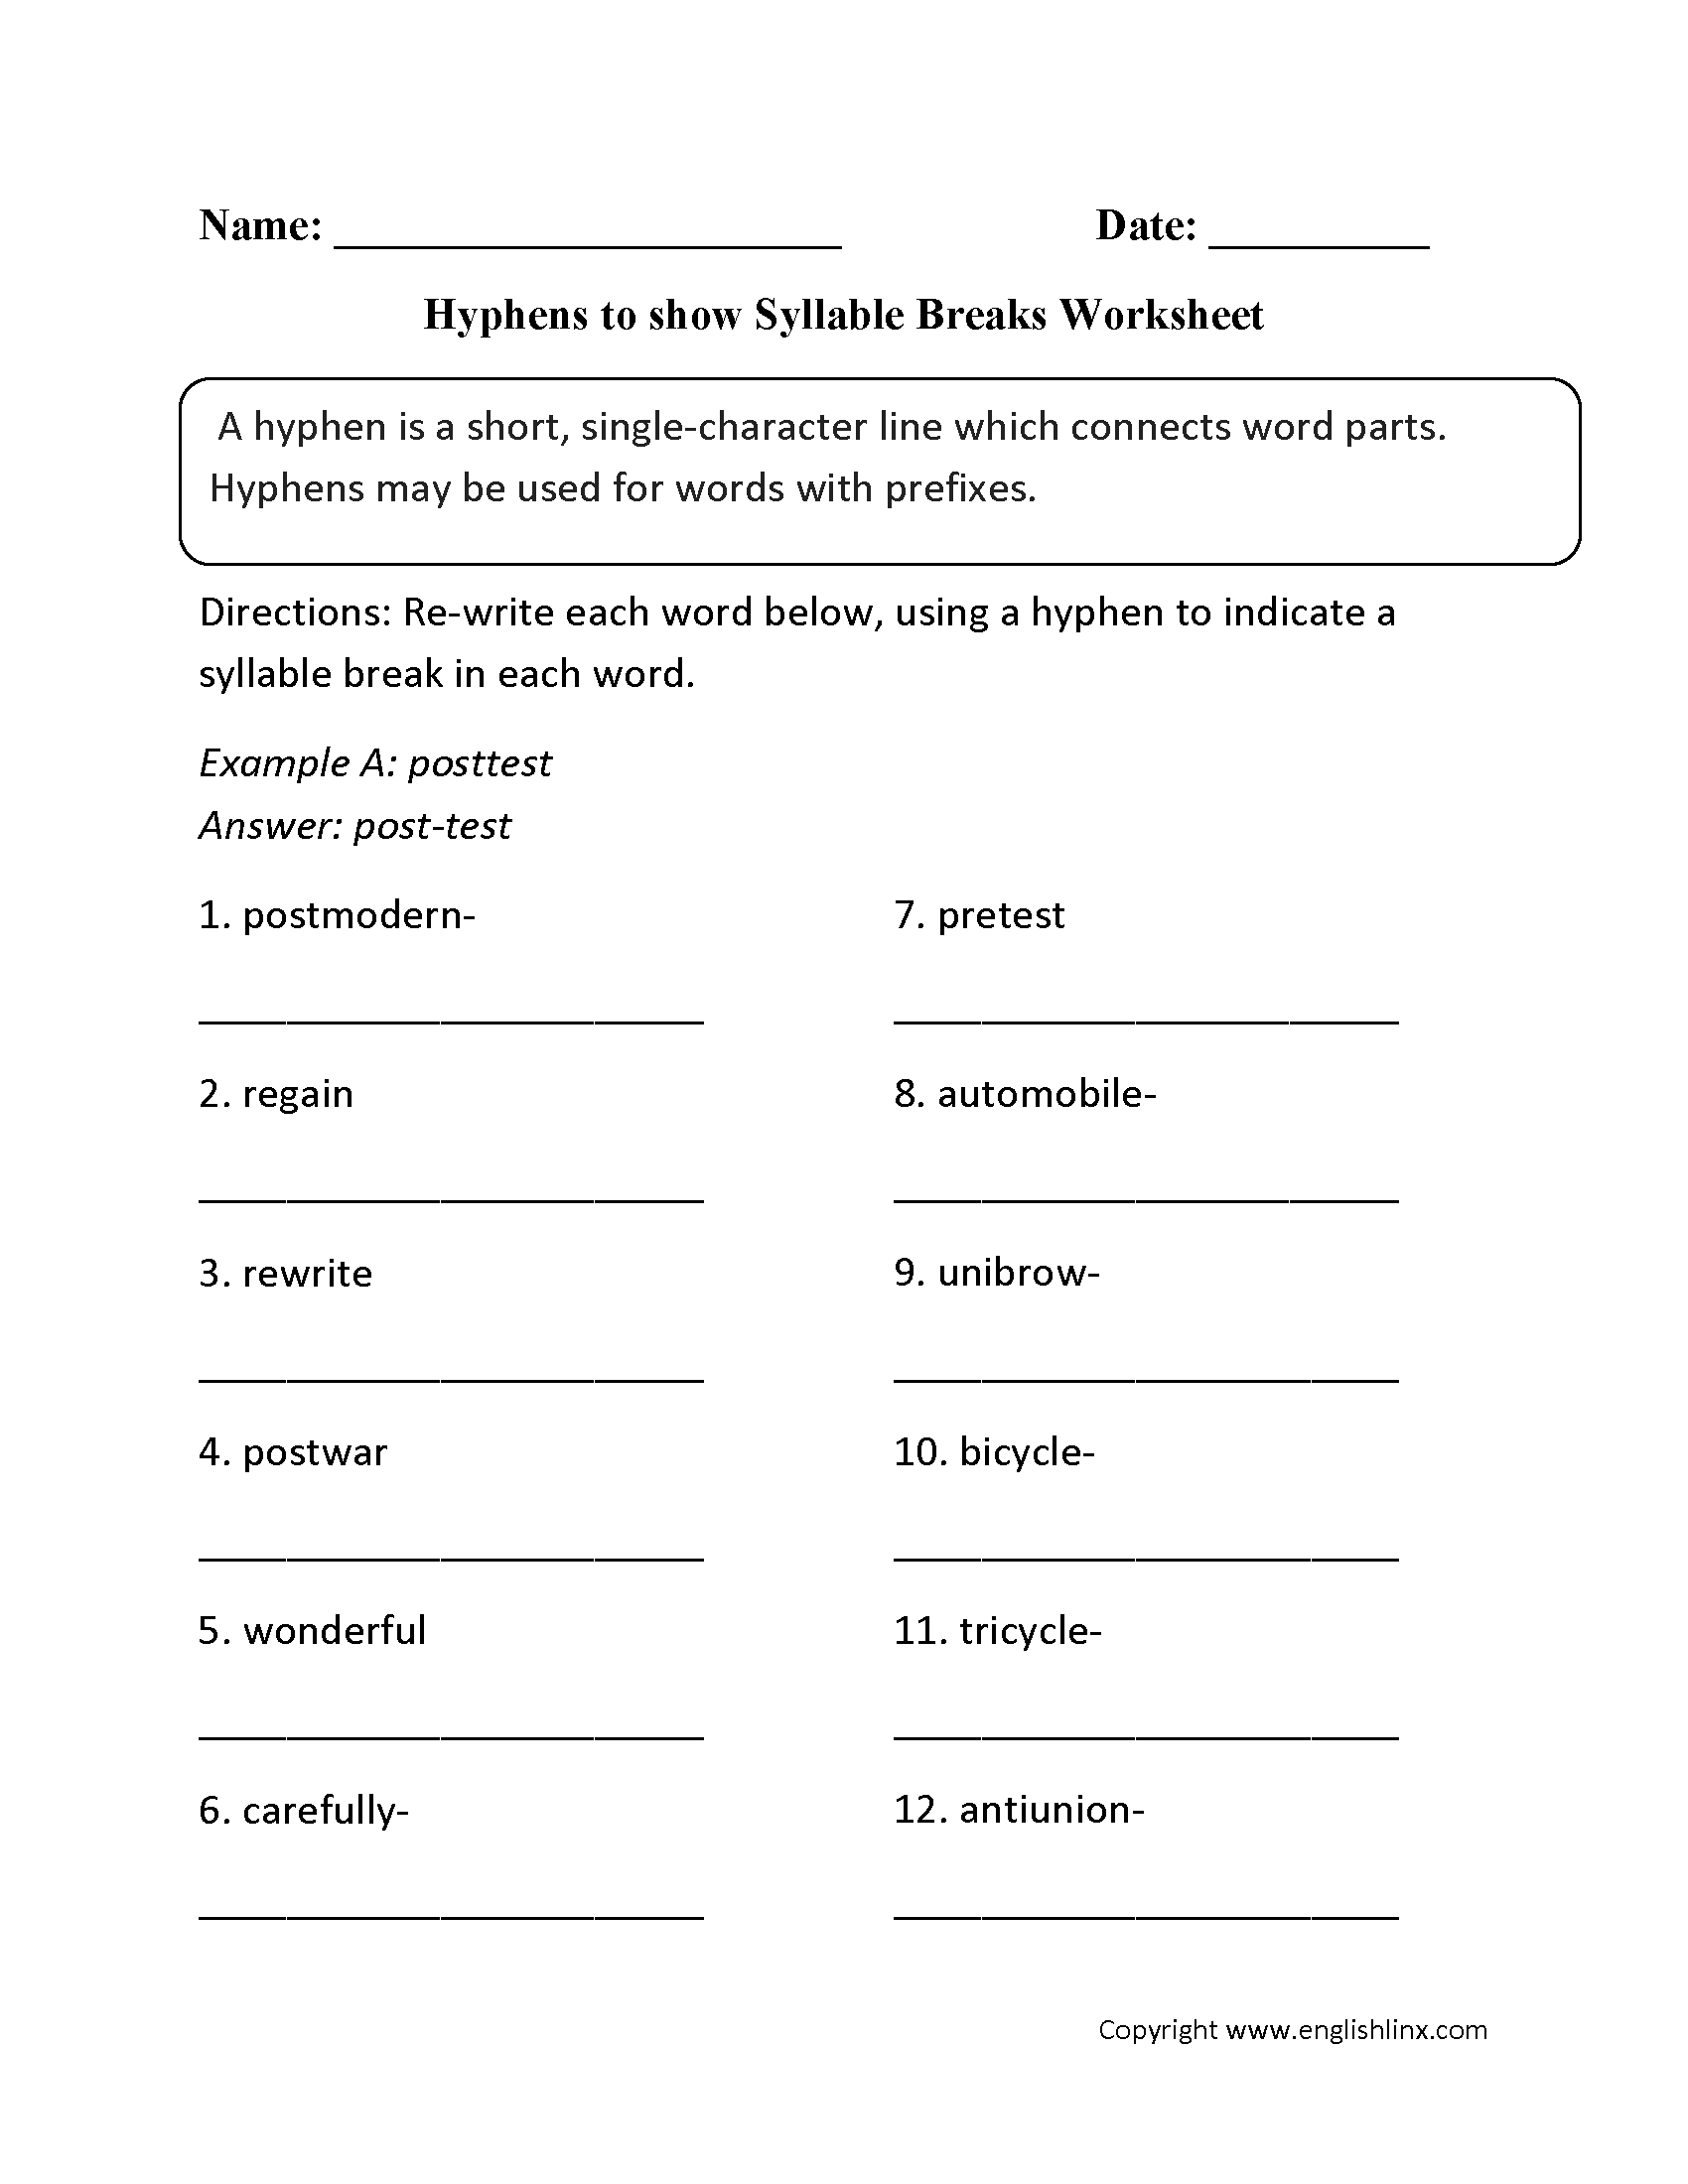 Hyphens to show Syllables Worksheet